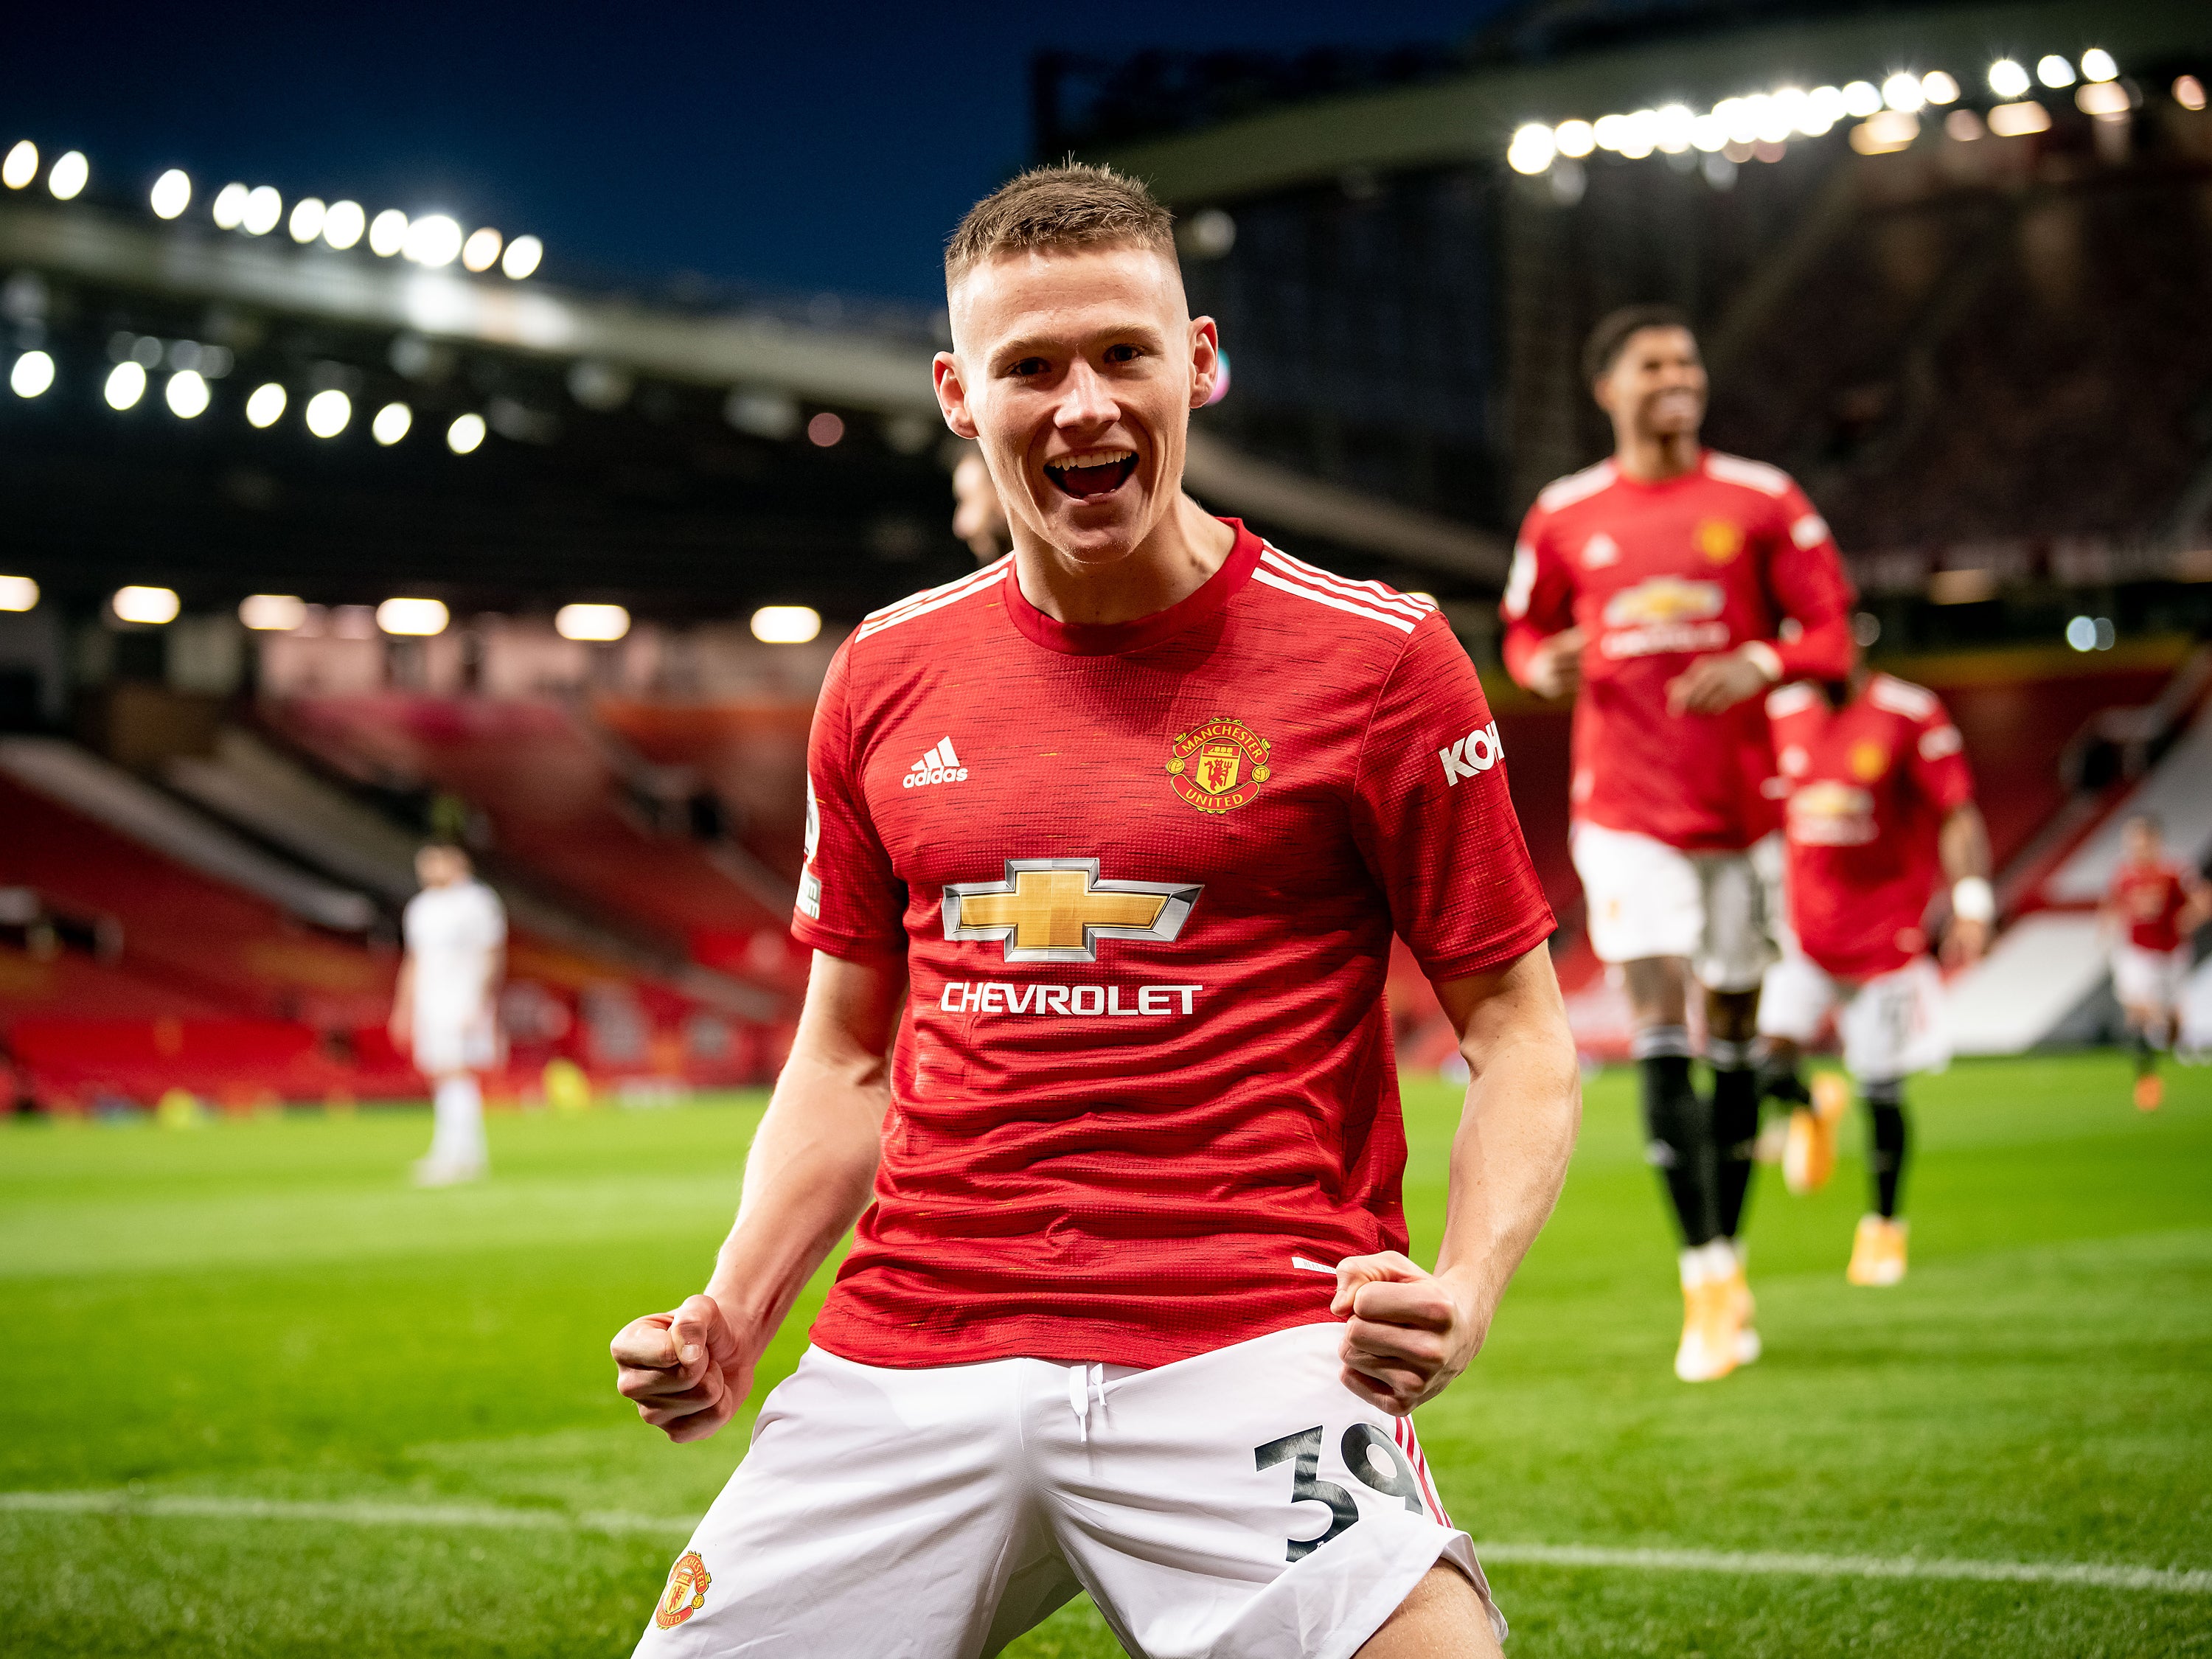 Scott McTominay scored twice in three minutes as Manchester United beat Leeds